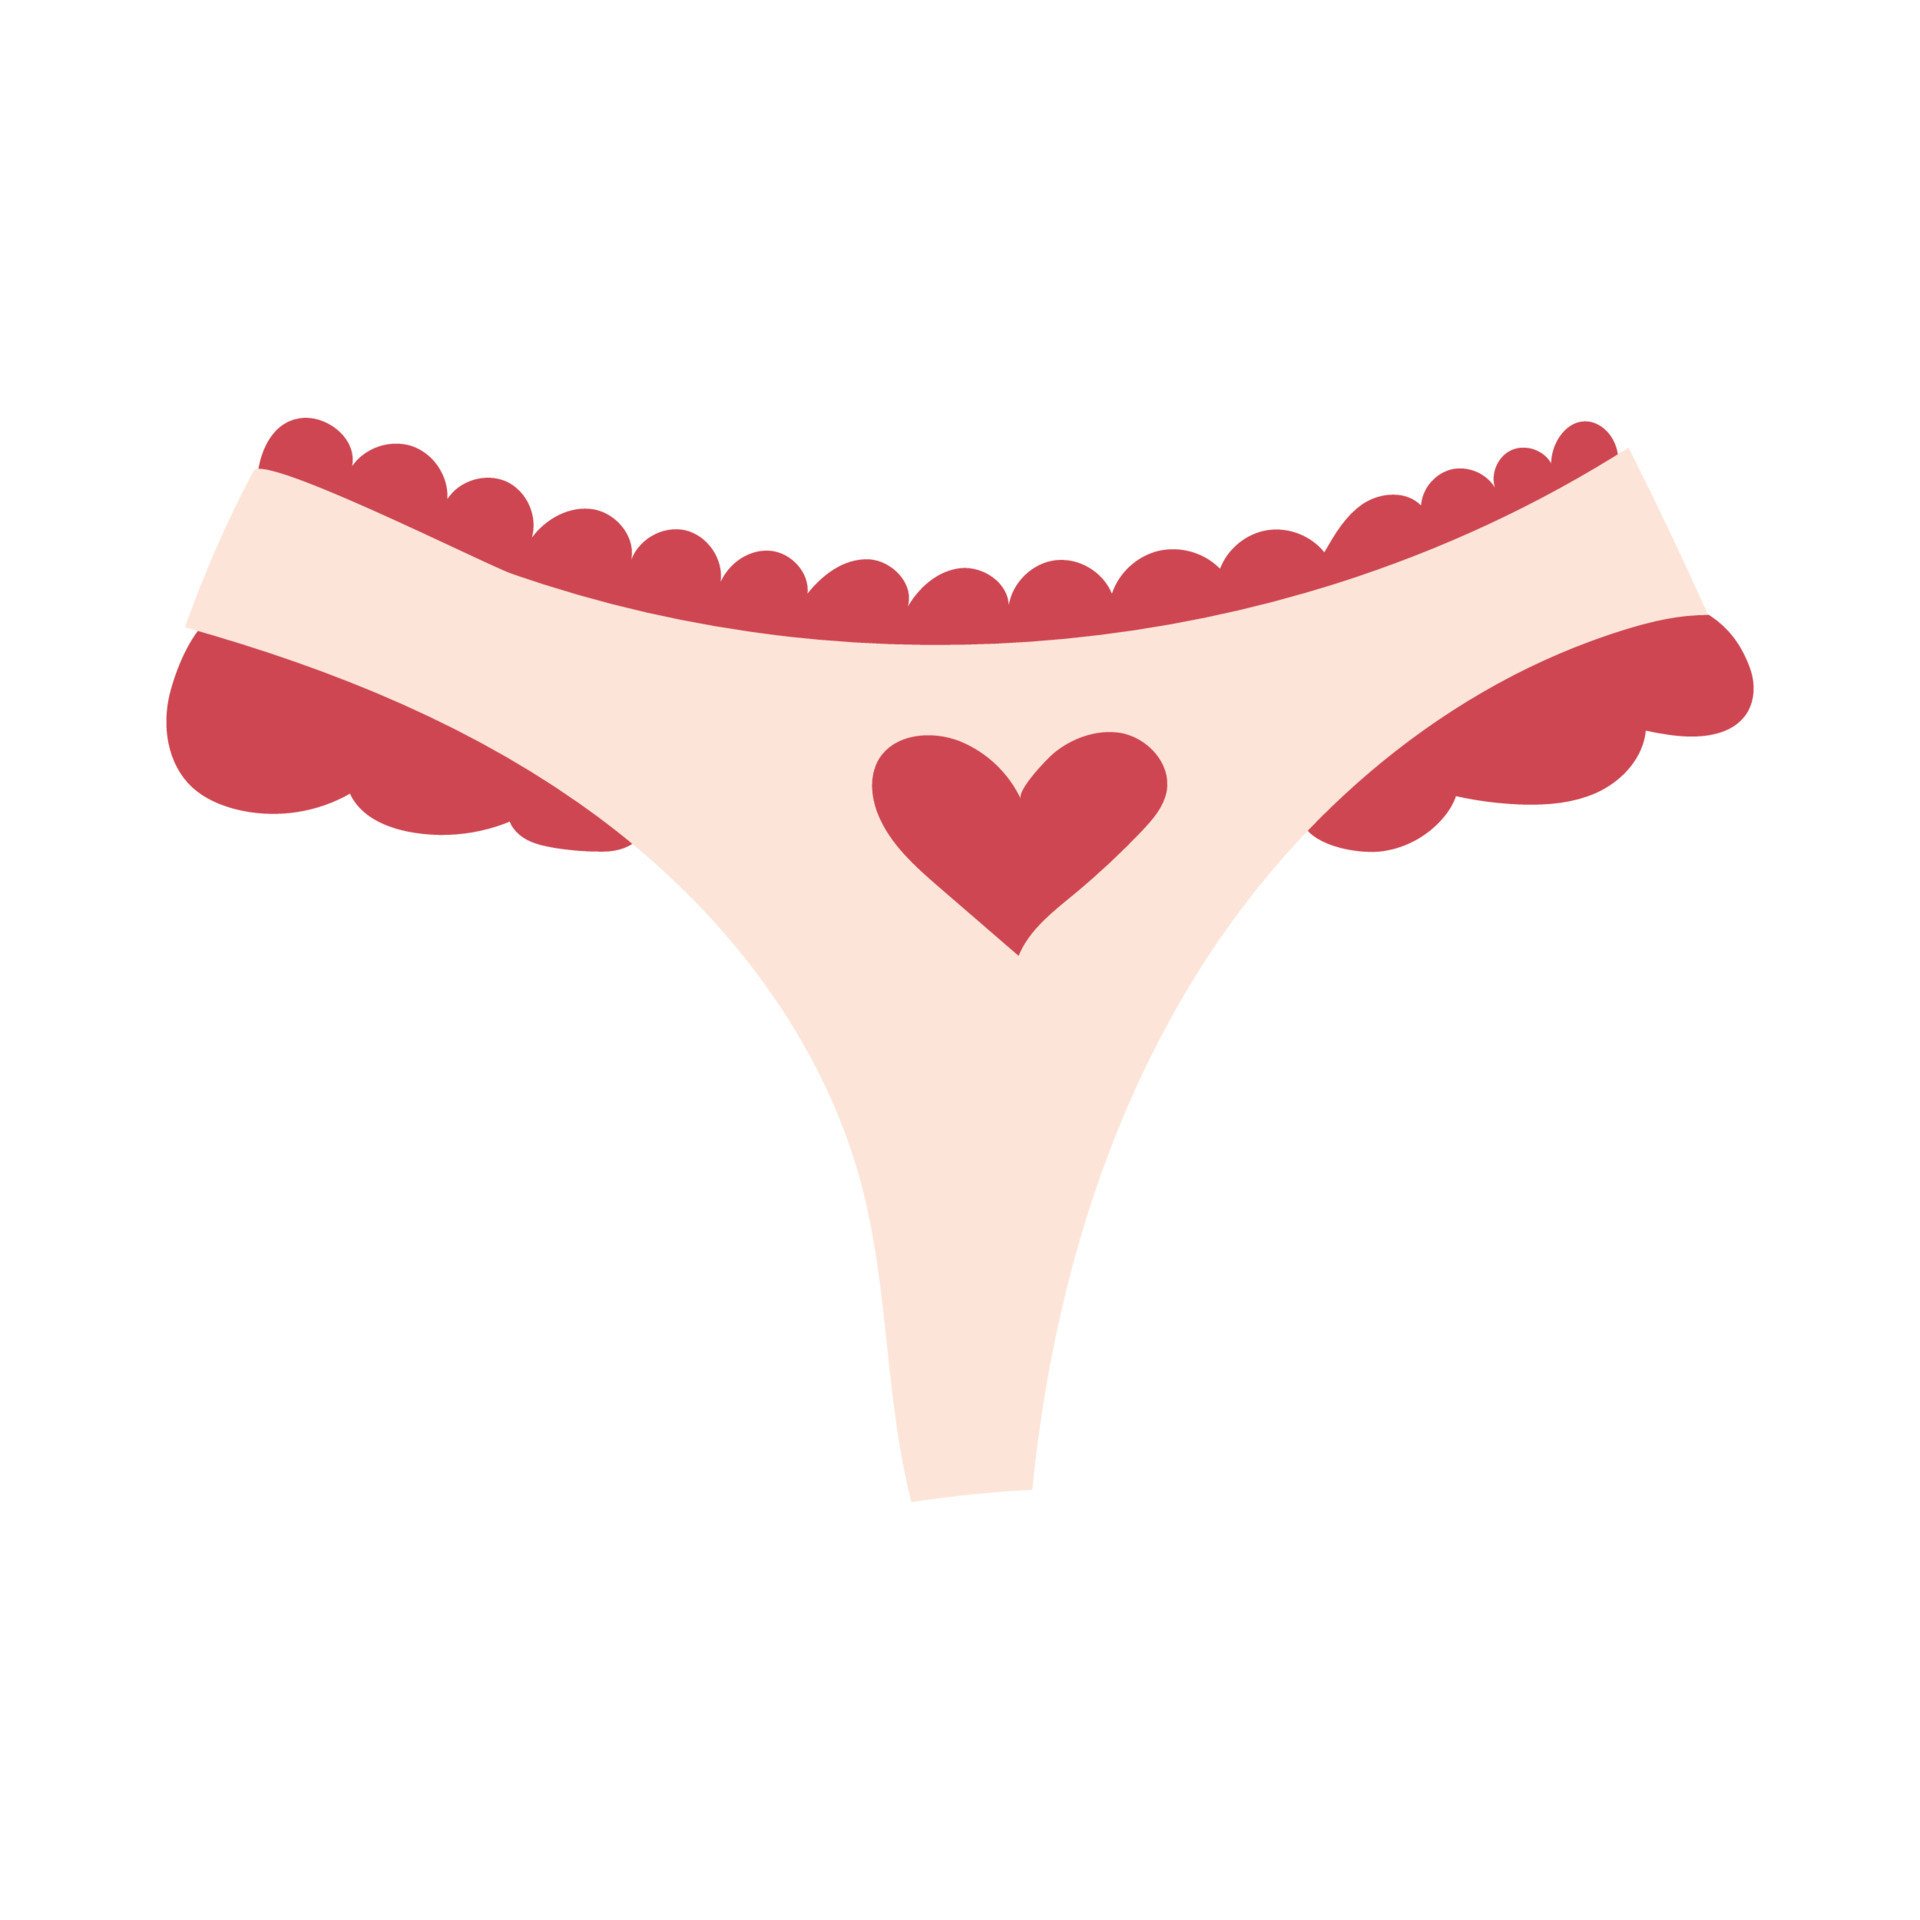 Women's lace panties drawn by hand. Valentines Day Card. Vector